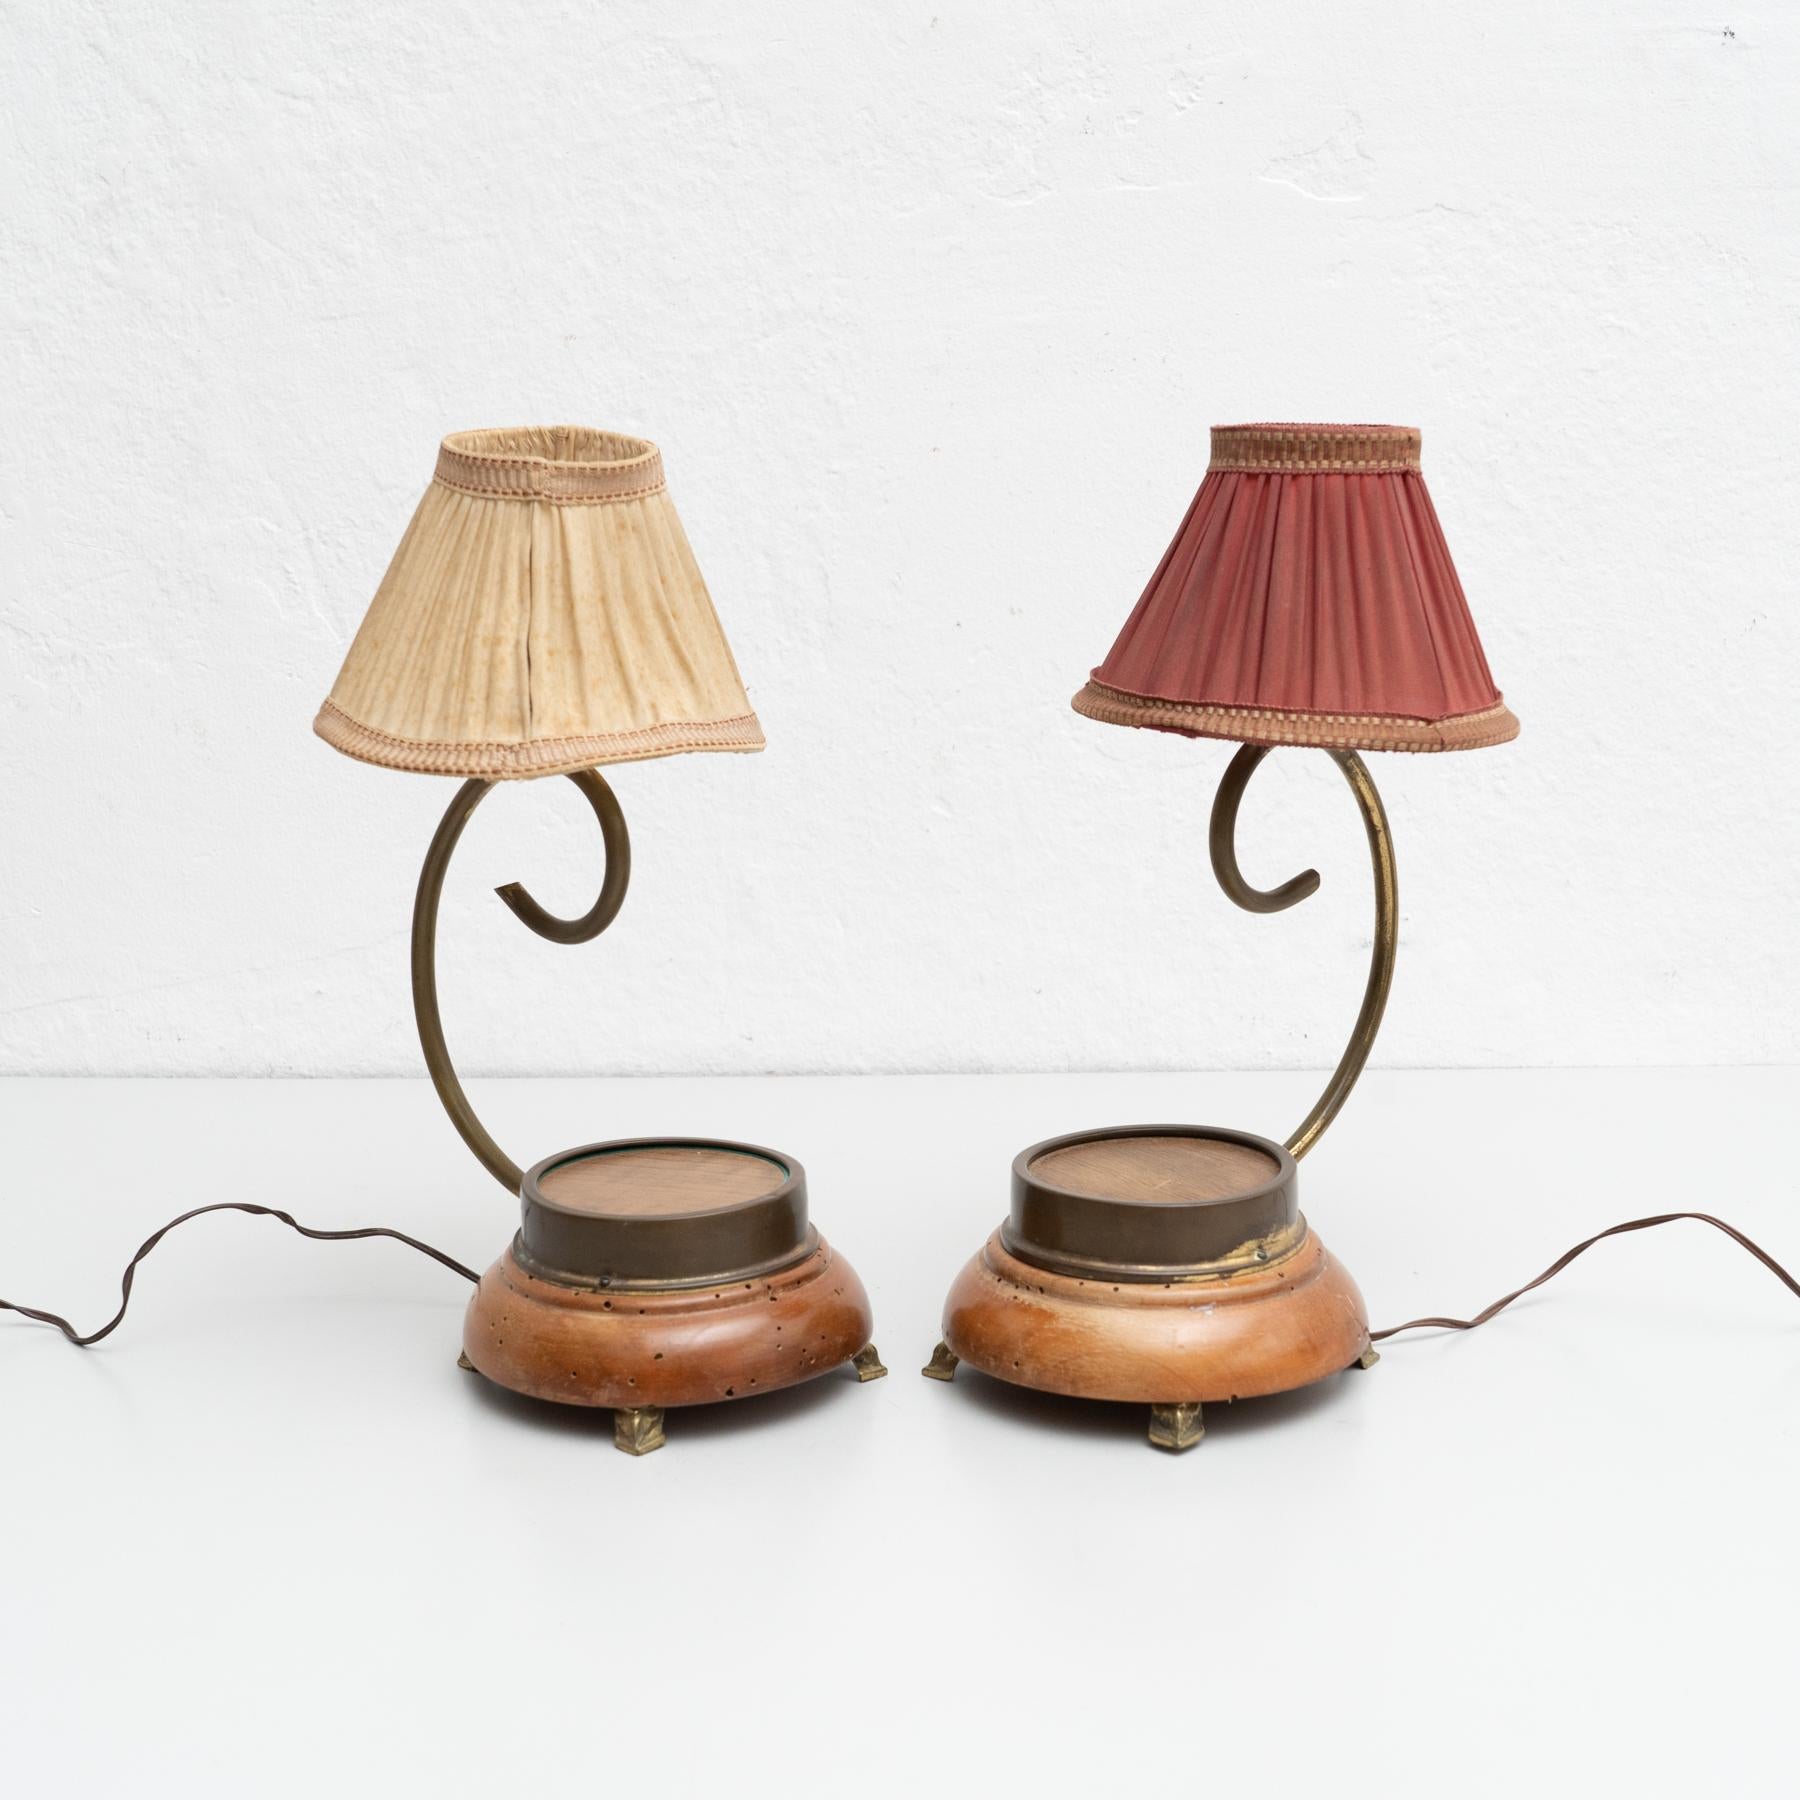 Set of two early 20th century table lamp, with a wooden base and a paper screen.

Manufactured by unknown designer in Spain.

In original condition, with minor wear consistent with age and use, preserving a beautiful